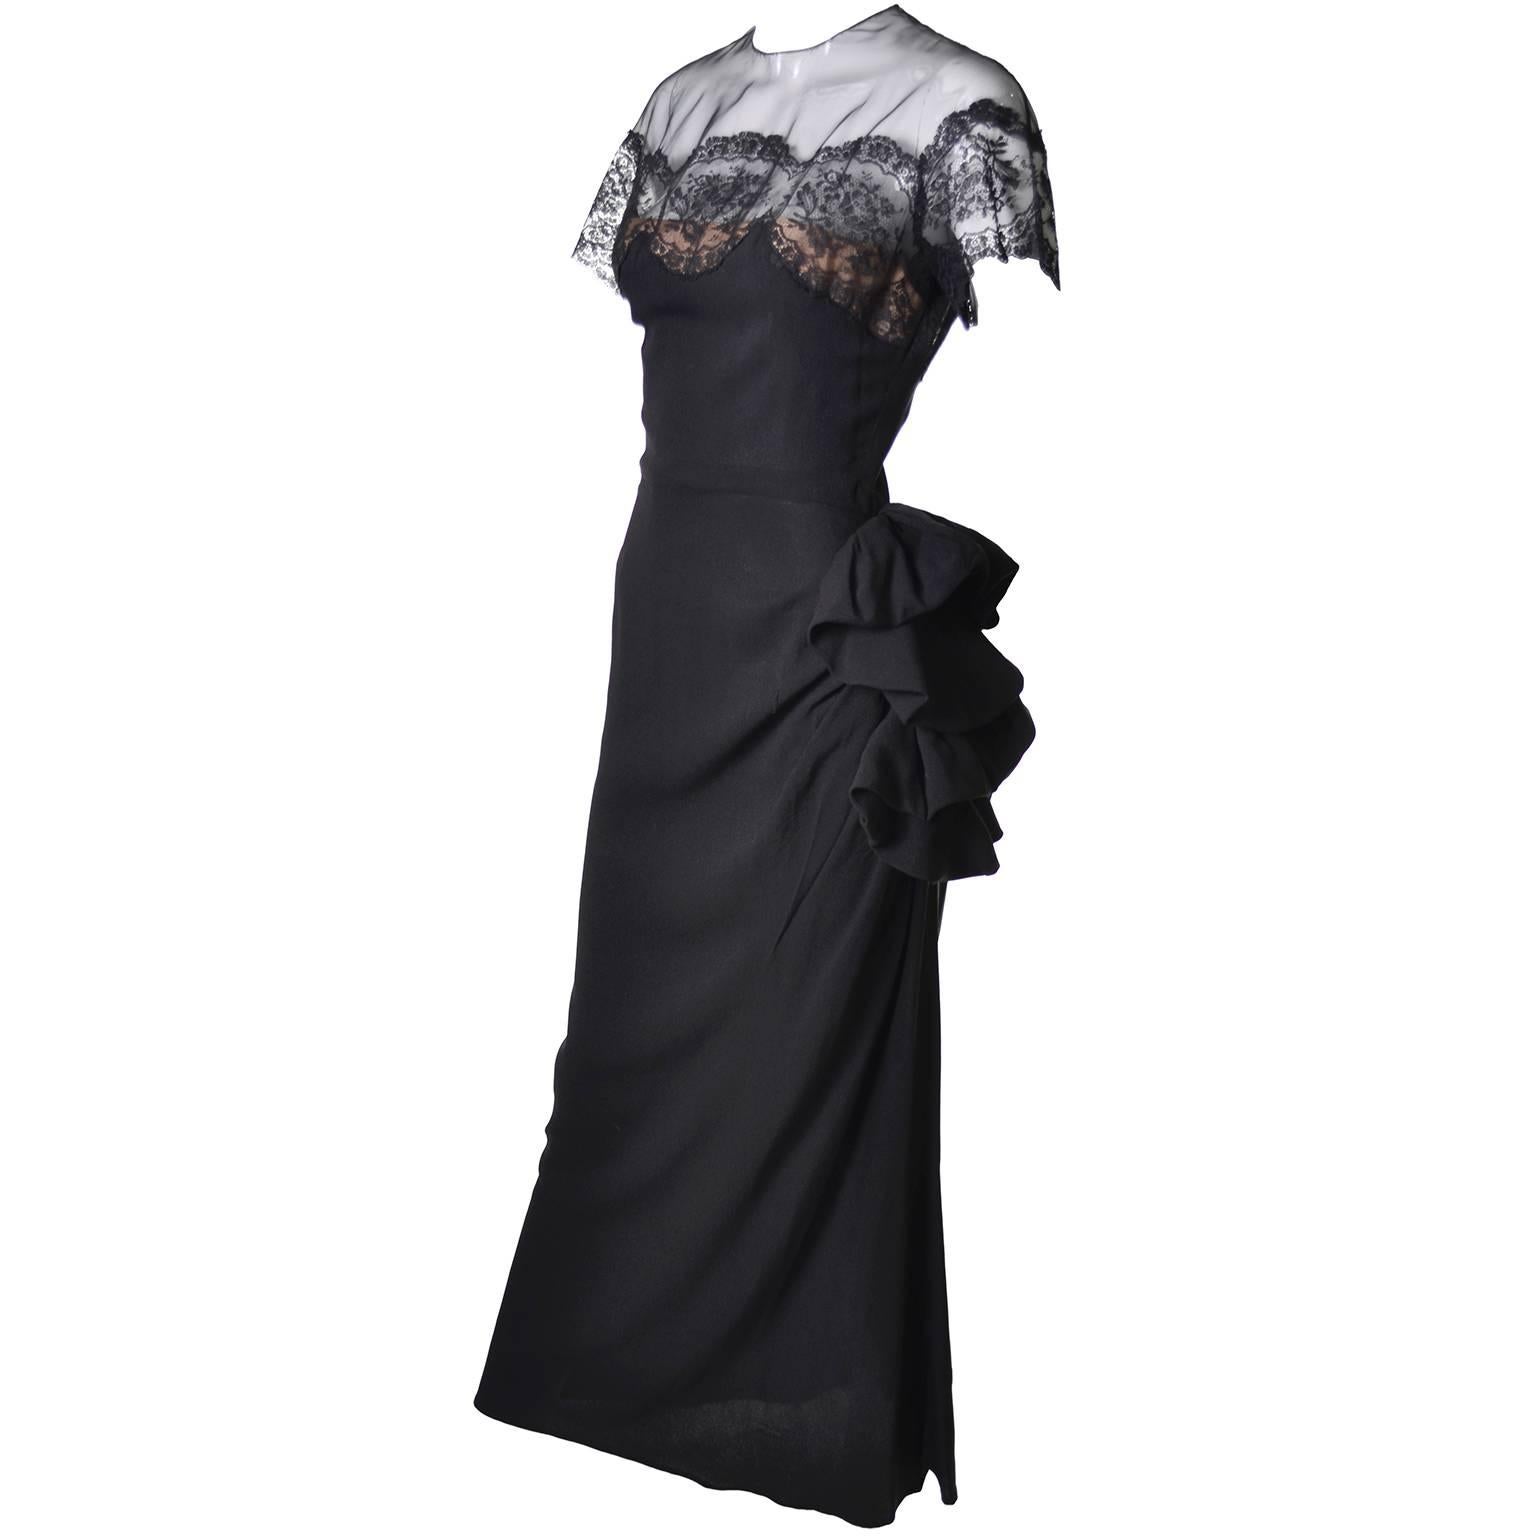 This sensational 1940's Peggy Hunt vintage black rayon crepe dress has a pretty organza illusion bodice and fine lace trim. Her 1940's dresses are rare to find and I was so thrilled to acquire this one in such good condition! The dress has a side